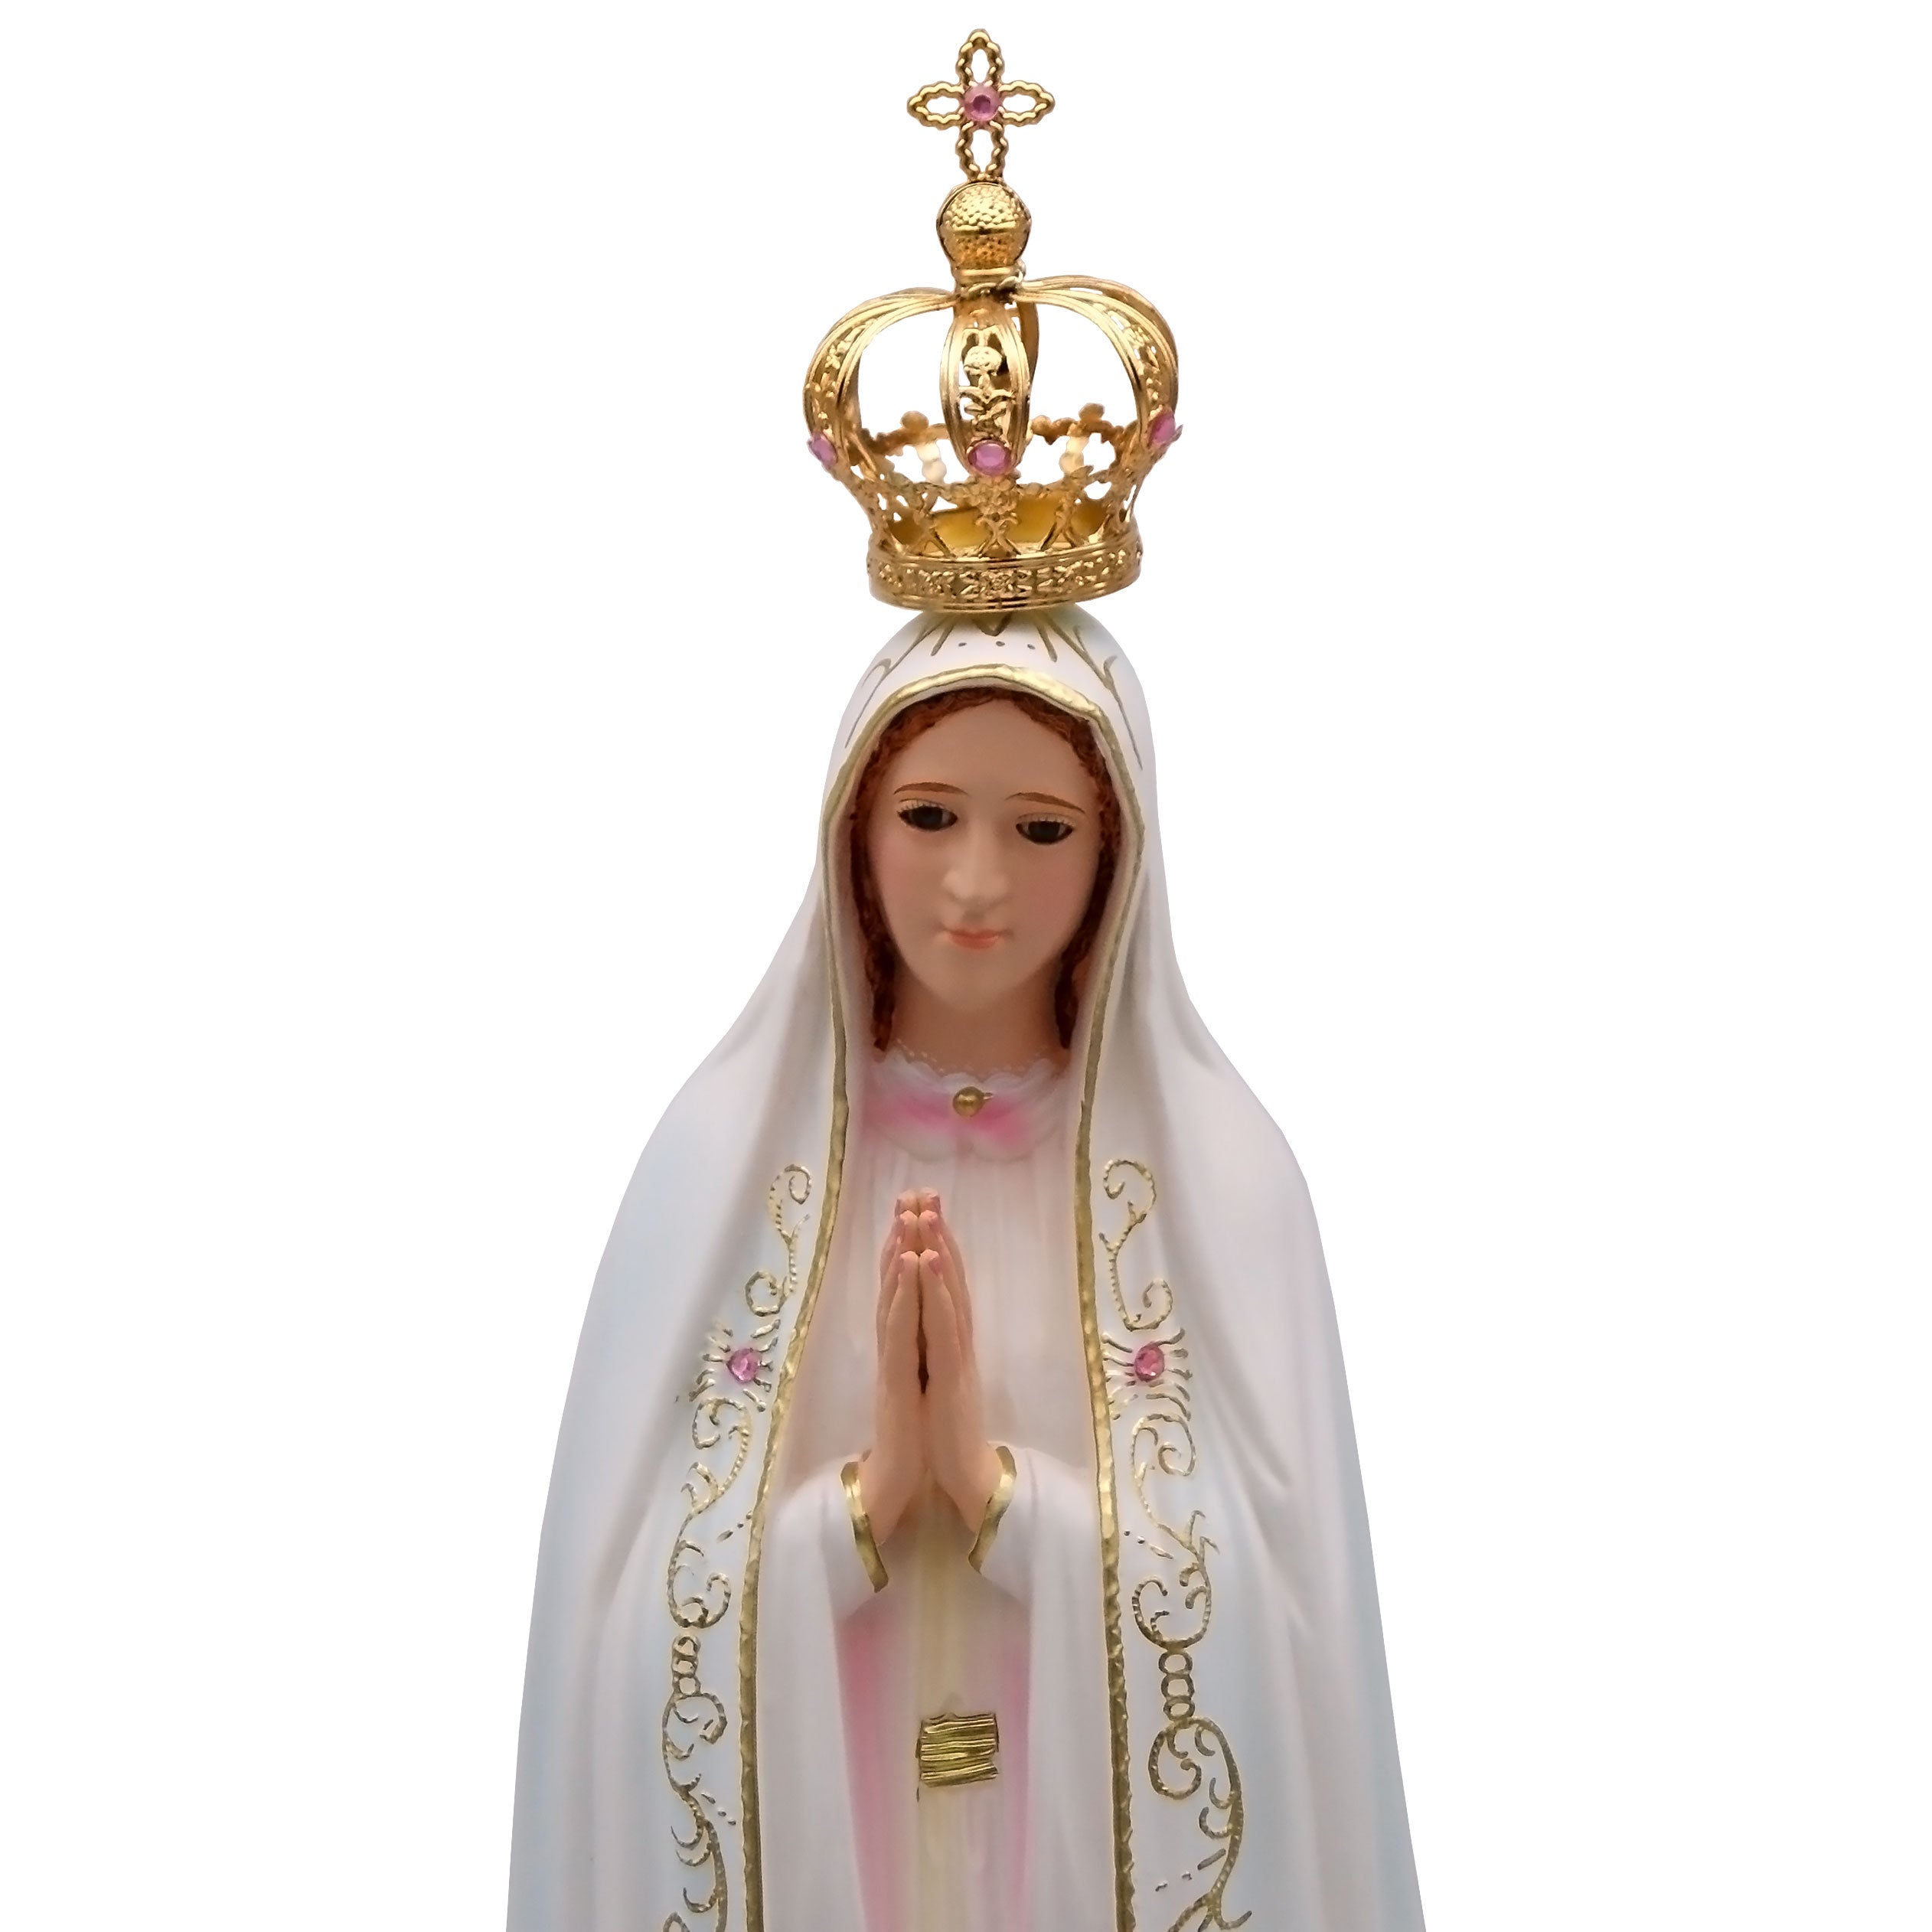 30 Inch Glass Eyes Our Lady of Fatima Statue Made in Portugal